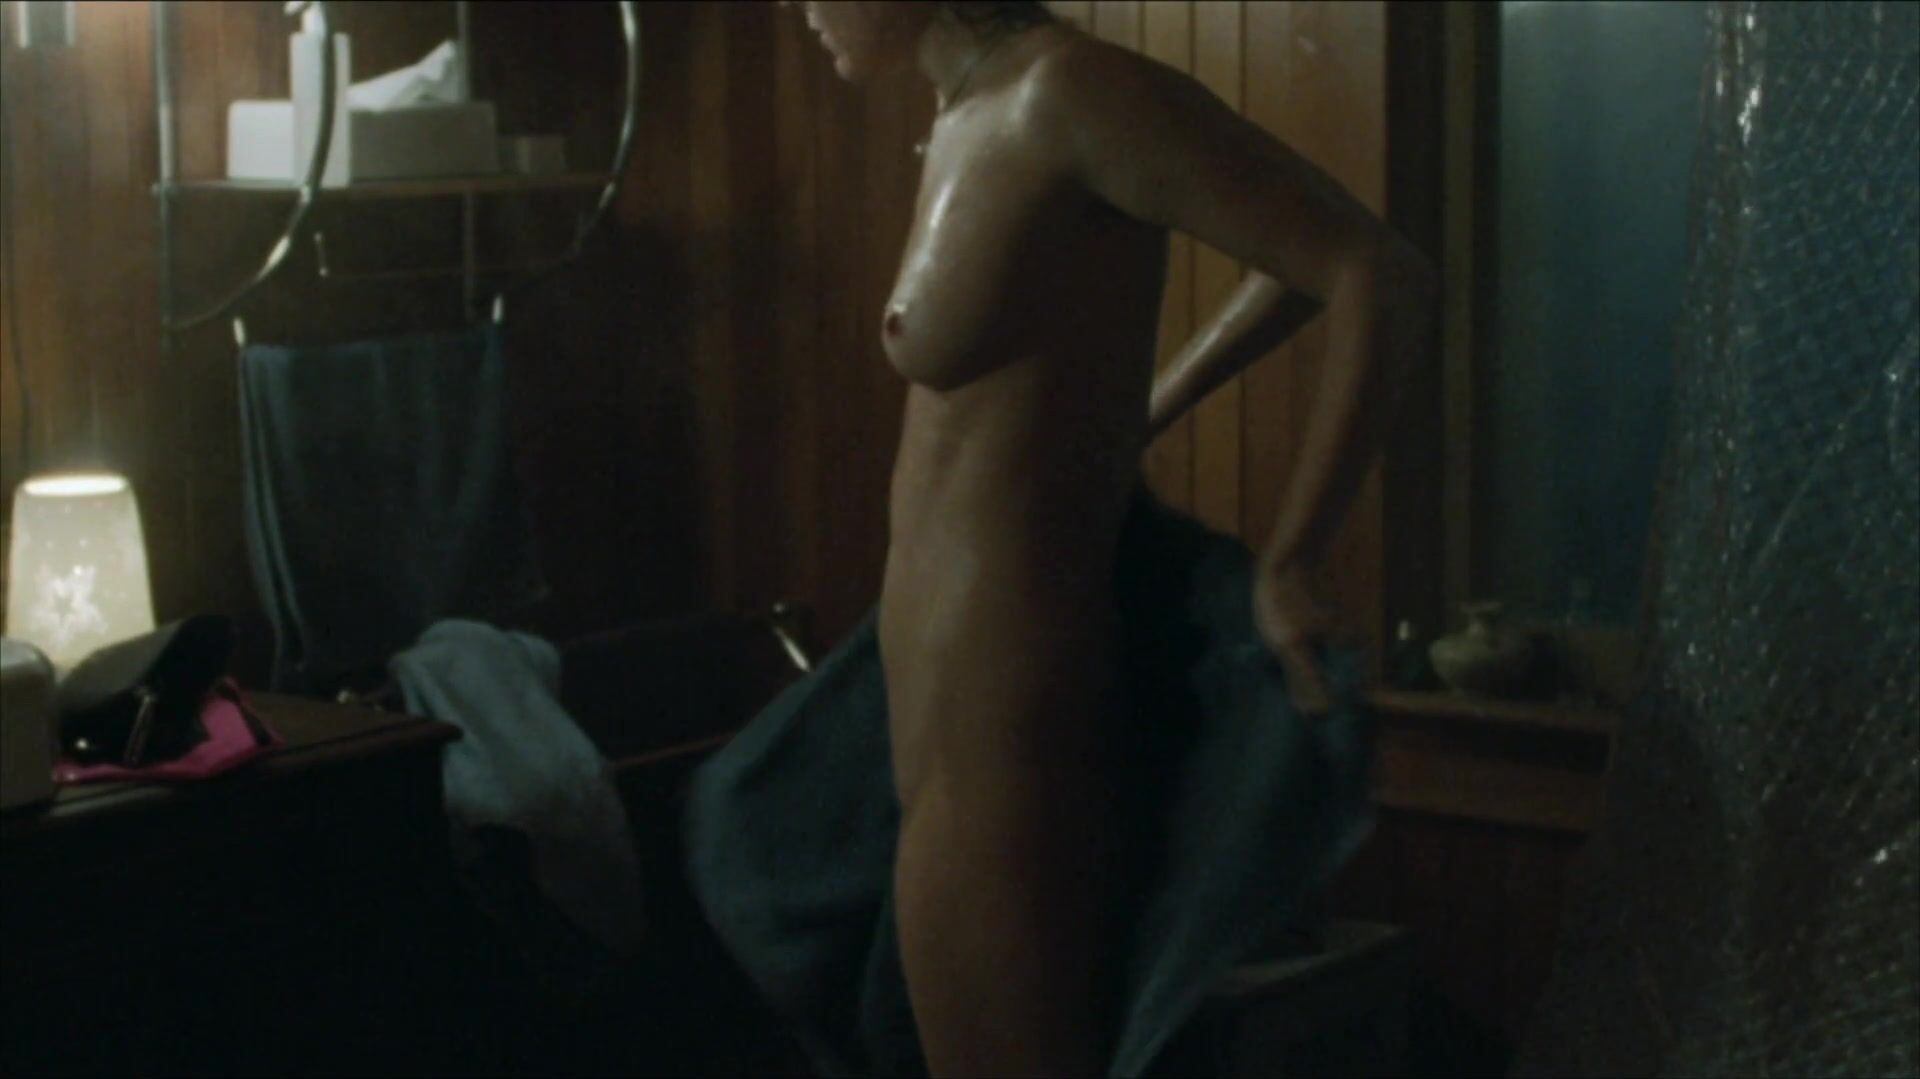 Blacks Riley Keough has nice boobies and viewers know it now from nude scene from The Lodge Bokep - 1